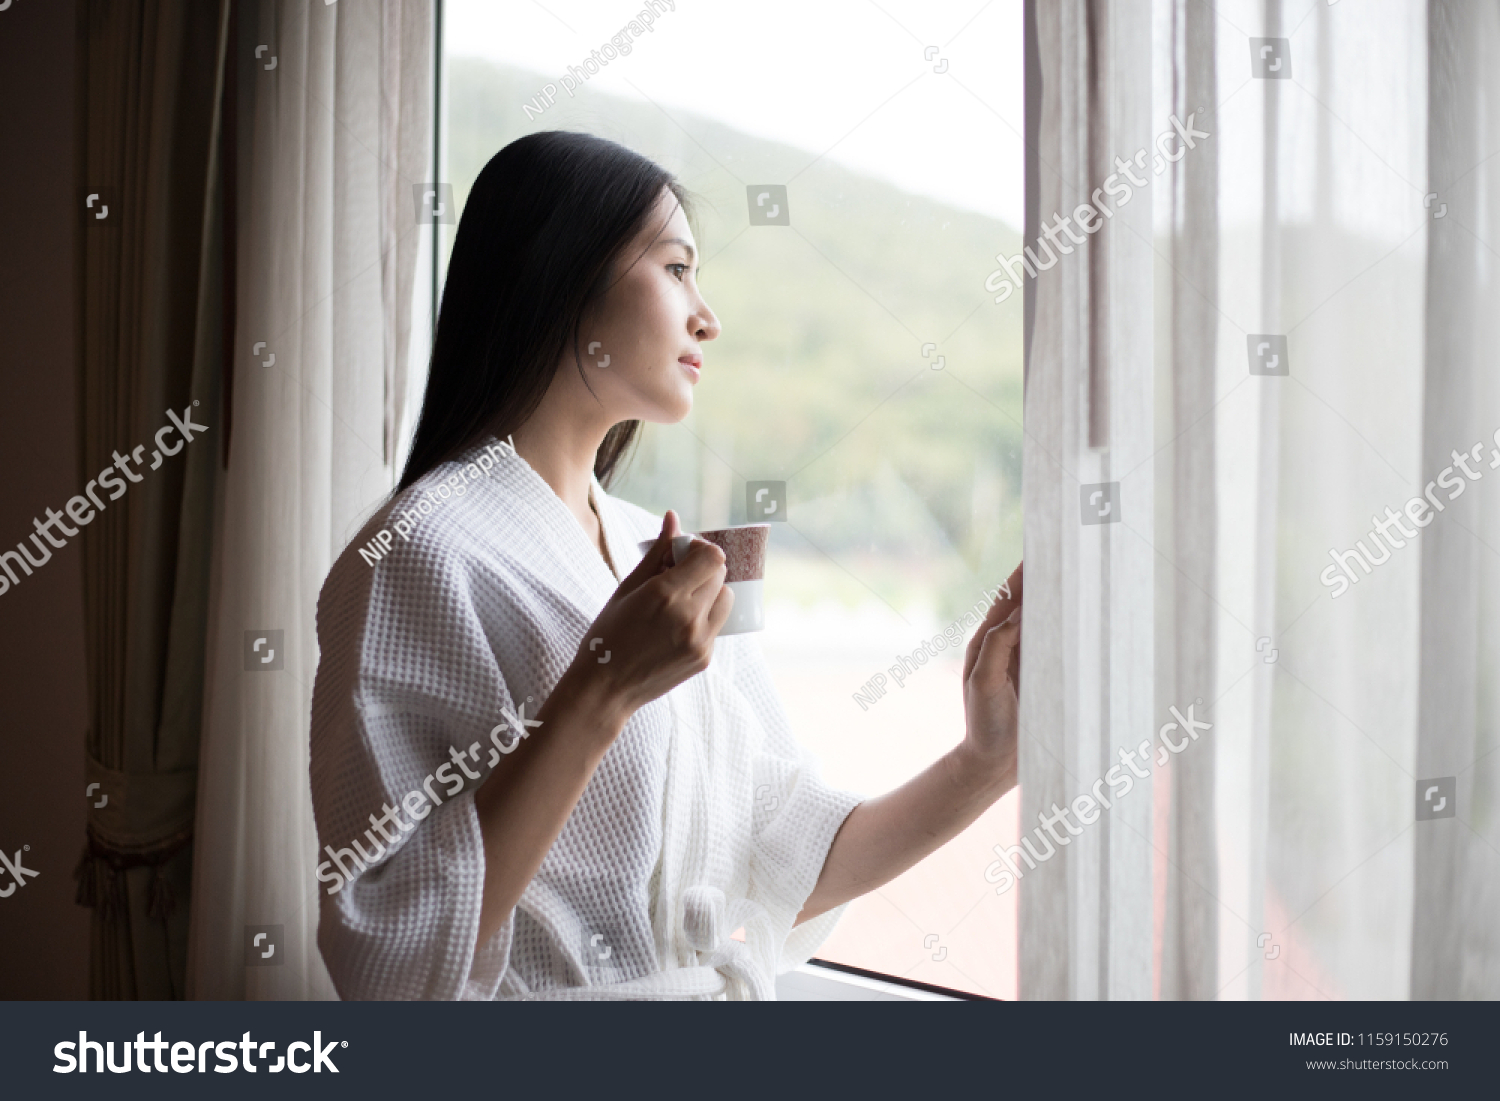 wake up :Woman in the morning holding a cup of tea or coffee and looking at the sunrise standing near the window in her home #1159150276